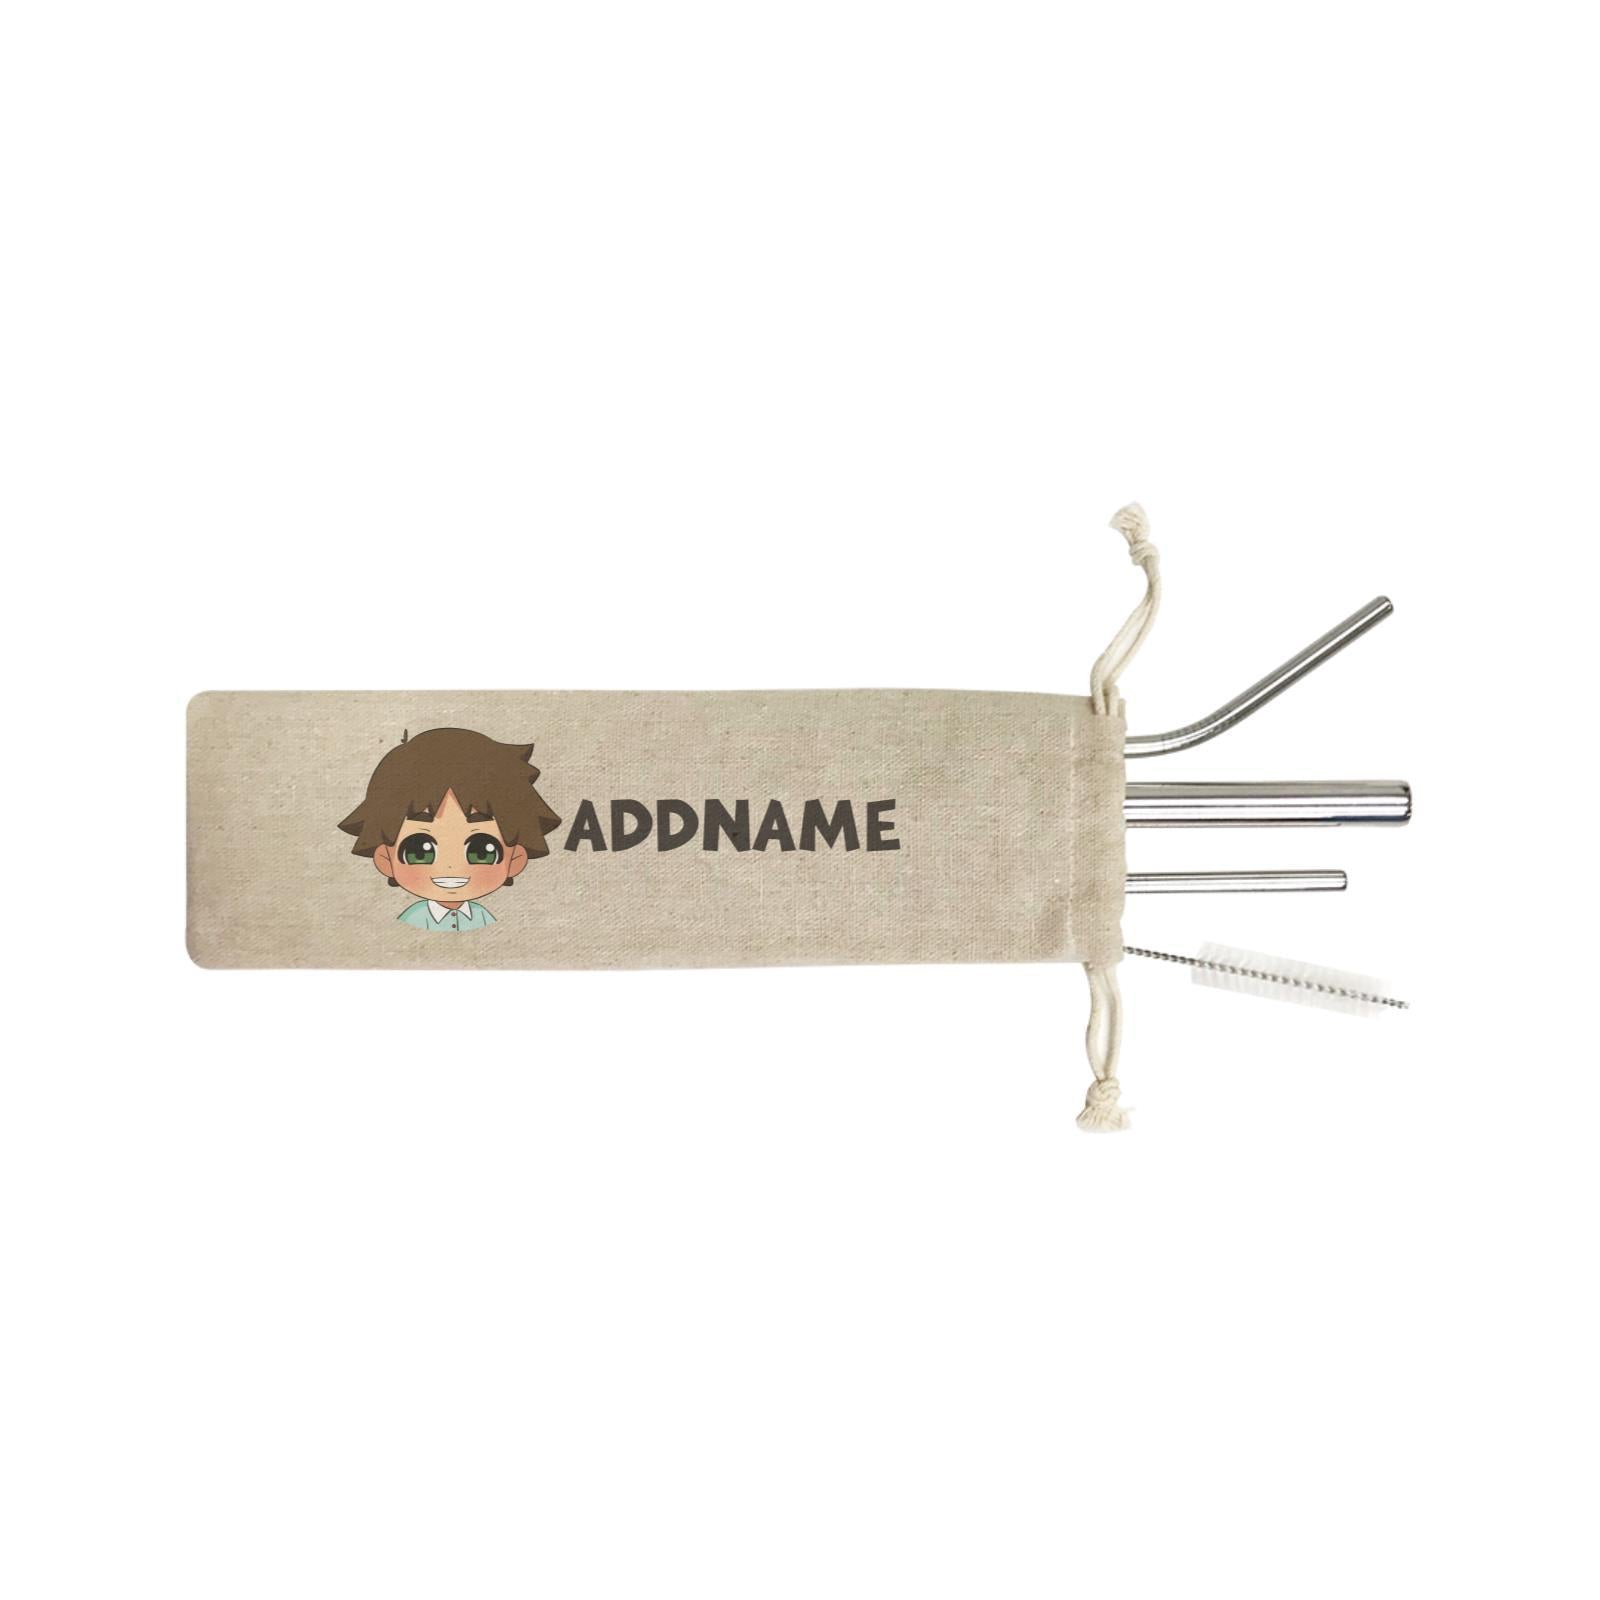 Children's Day Gift Series Little Boy Addname SB 4-in-1 Stainless Steel Straw Set In a Satchel